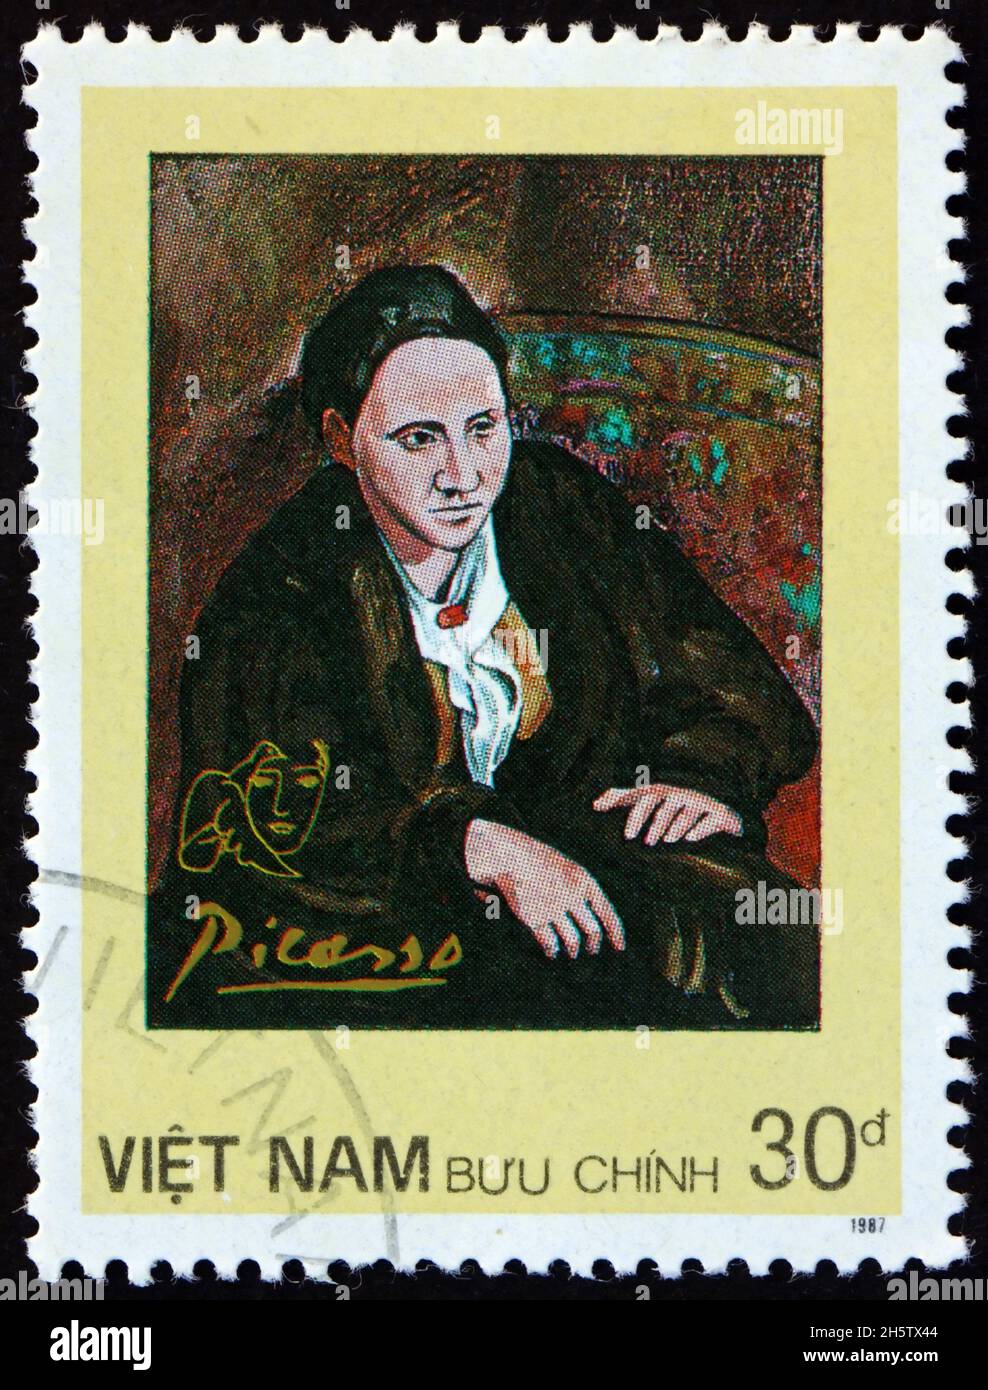 VIETNAM - CIRCA 1987: a stamp printed in Vietnam shows portrait of Gertrude Stein, painting by Picasso, circa 1987 Stock Photo